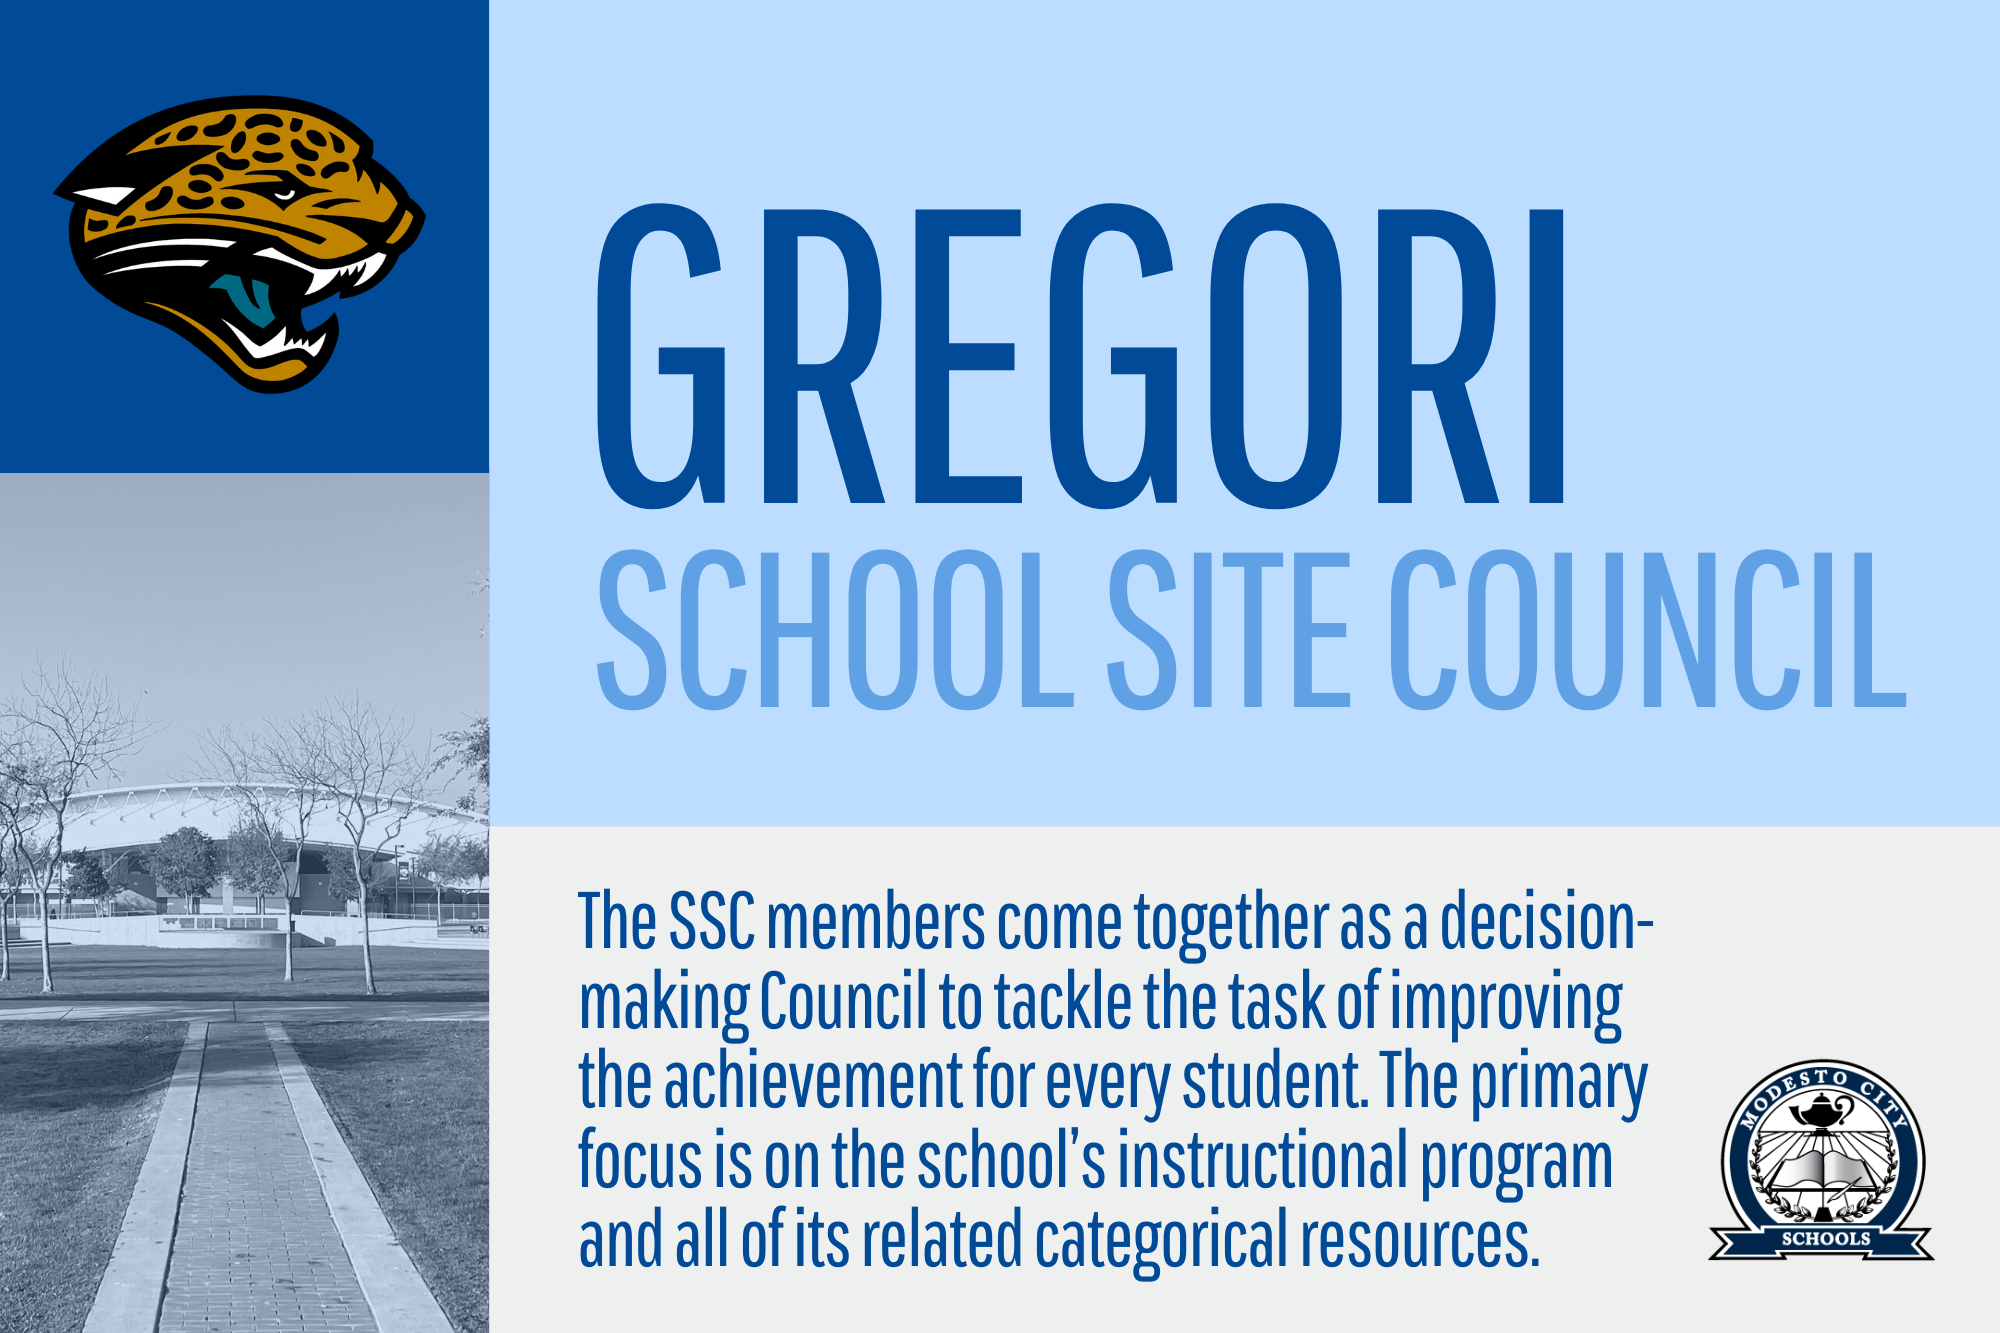 Gregori School Site Council - decision making team improving achievement for every student